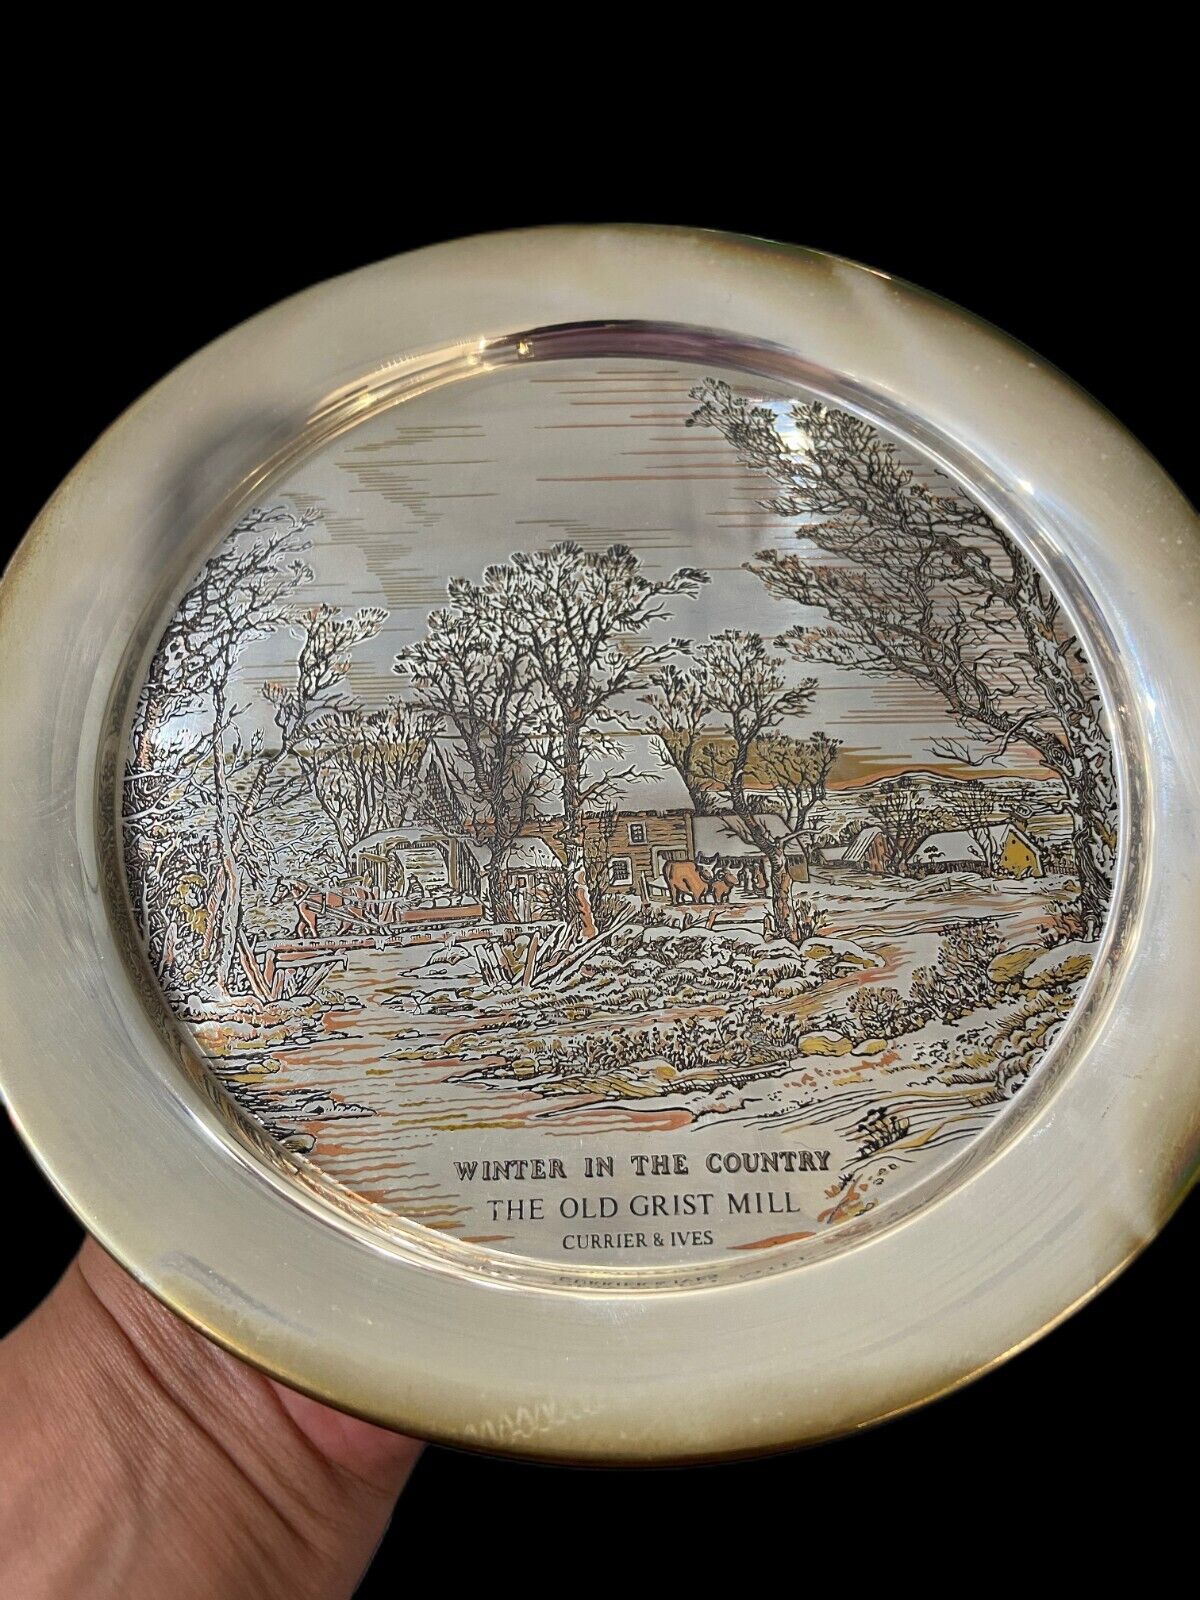 1974 Danbury Mint Sterling Silver Plate Limited Edition Winter in the Country